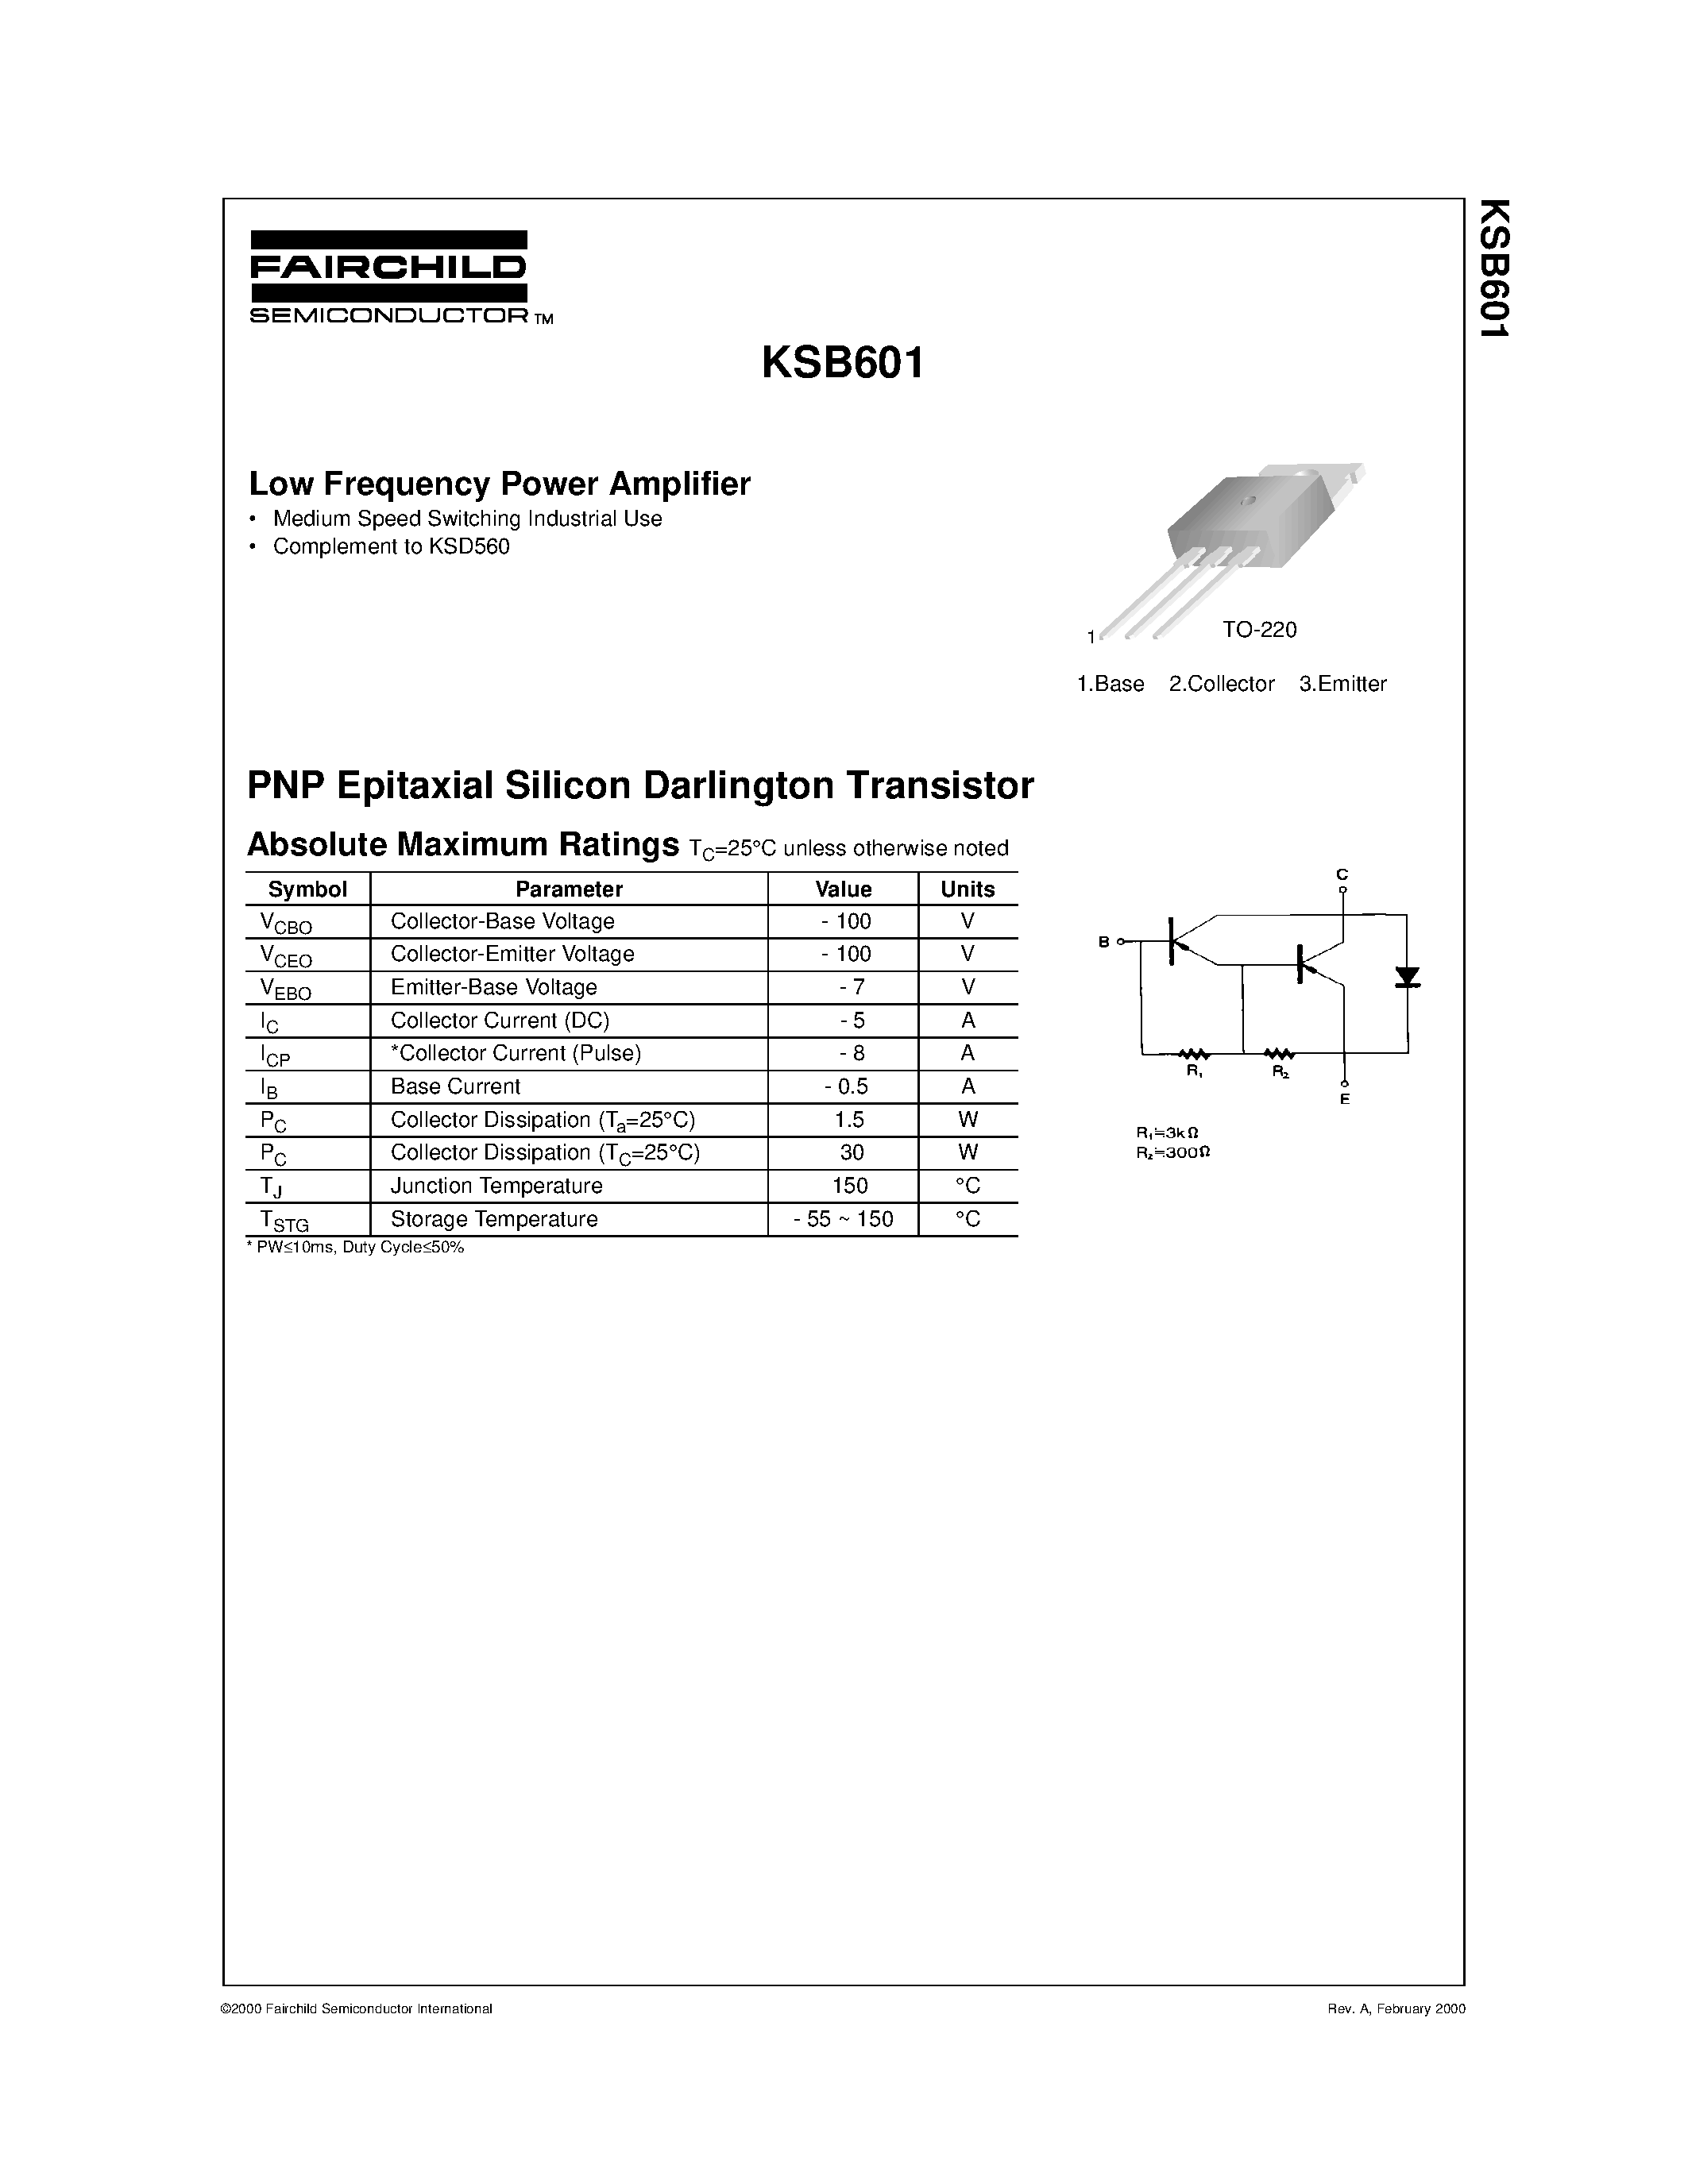 Datasheet KSB601 - Low Frequency Power Amplifier page 1